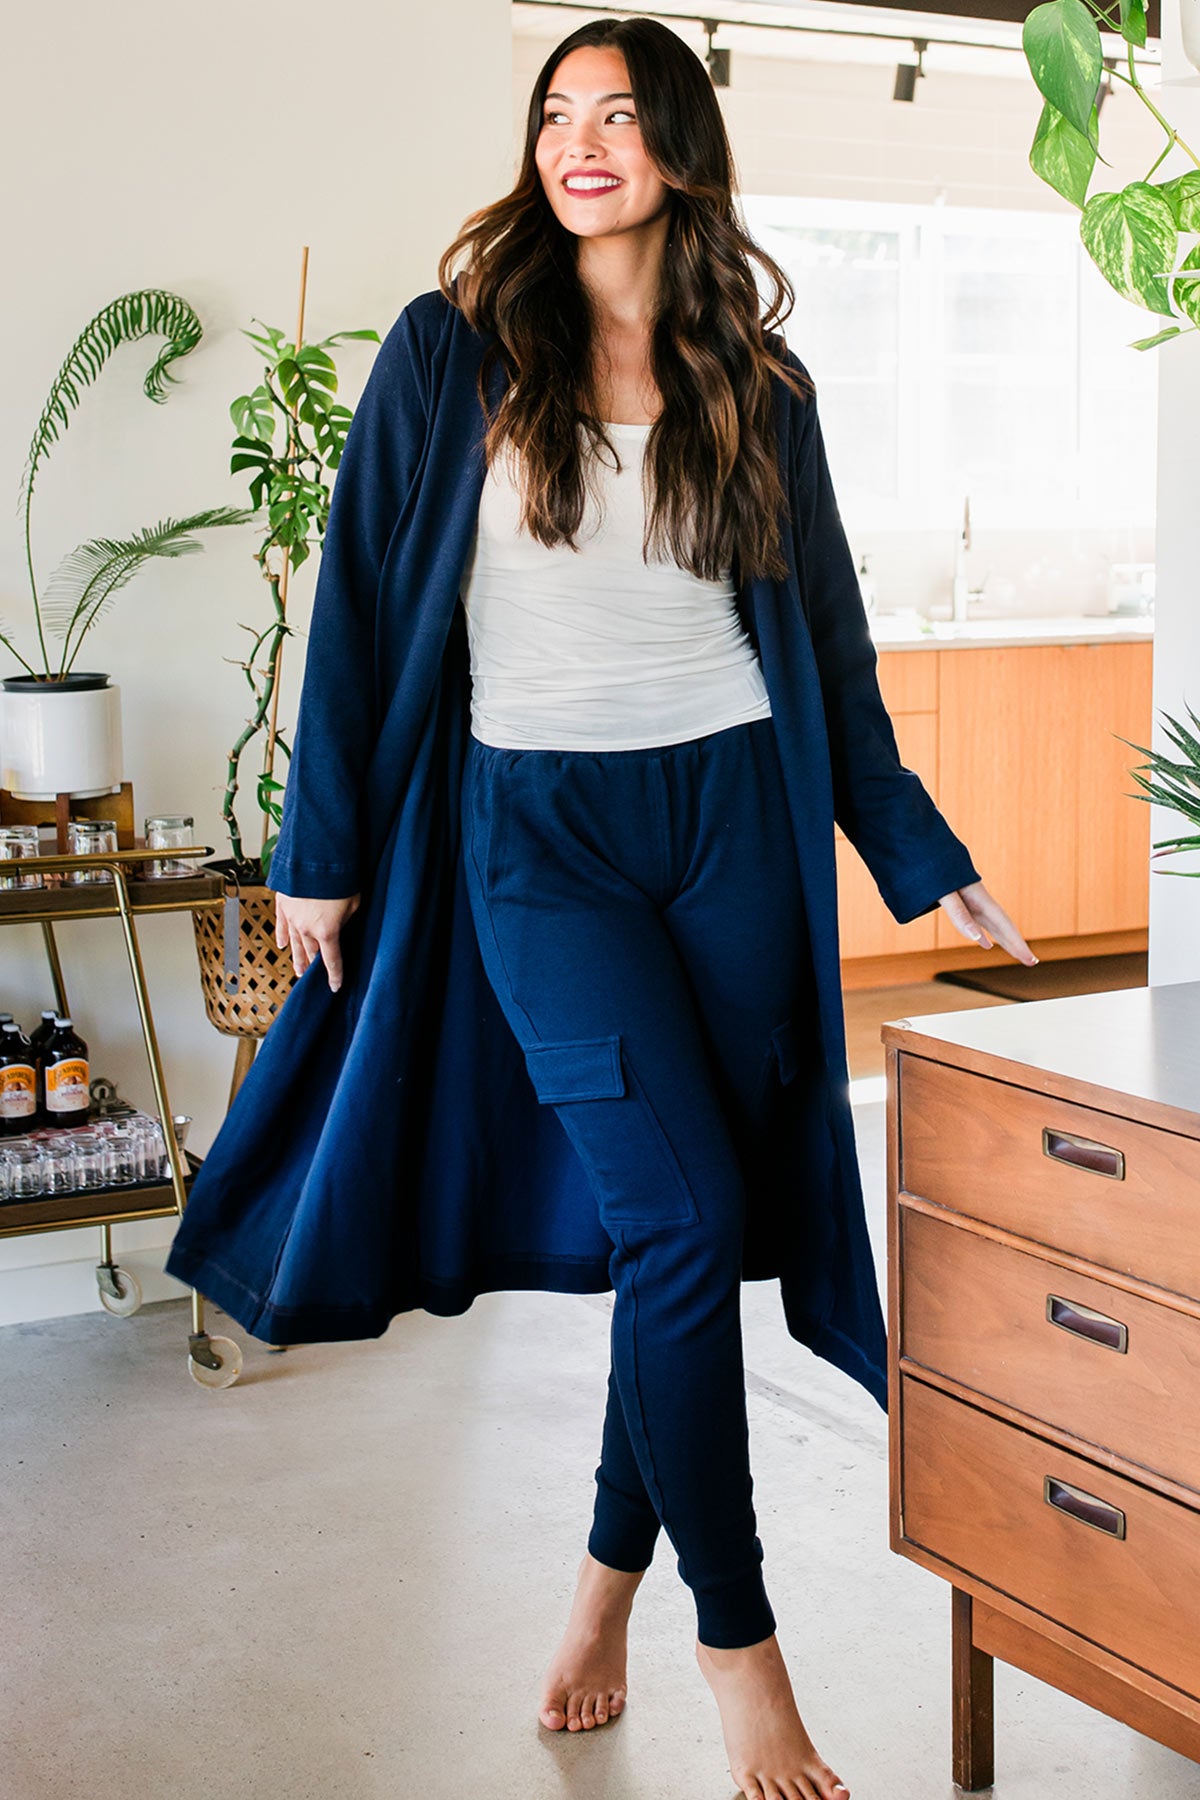 A woman stepping forward with one leg crossing in front of the other, wearing Yala Elliot Bamboo & Organic Cotton Sweatshirt Hooded Robe in Navy